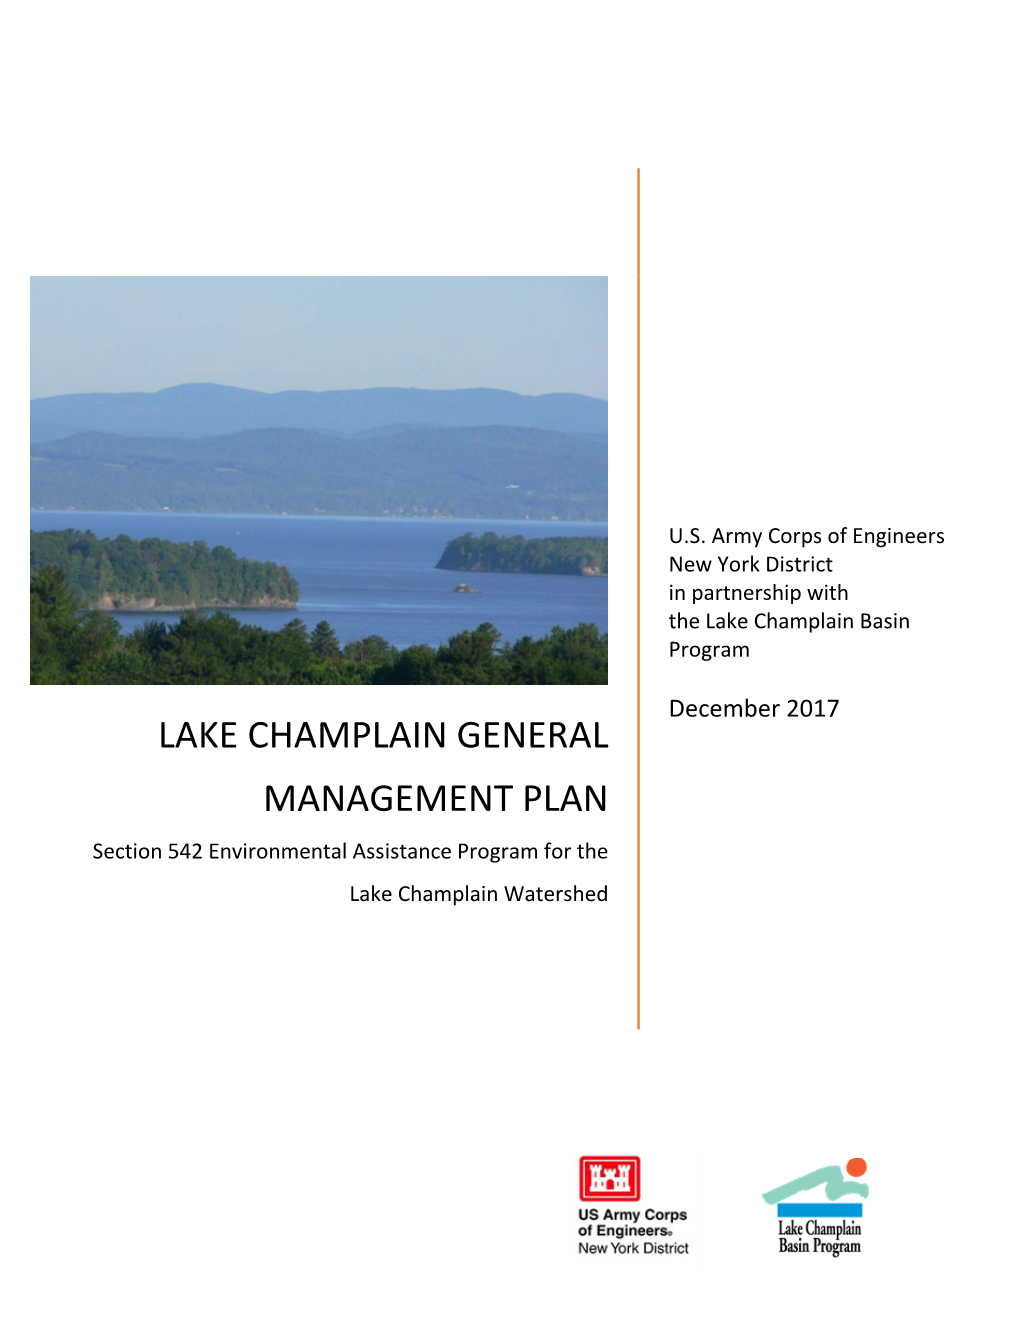 LAKE CHAMPLAIN GENERAL MANAGEMENT PLAN Section 542 Environmental Assistance Program for the Lake Champlain Watershed